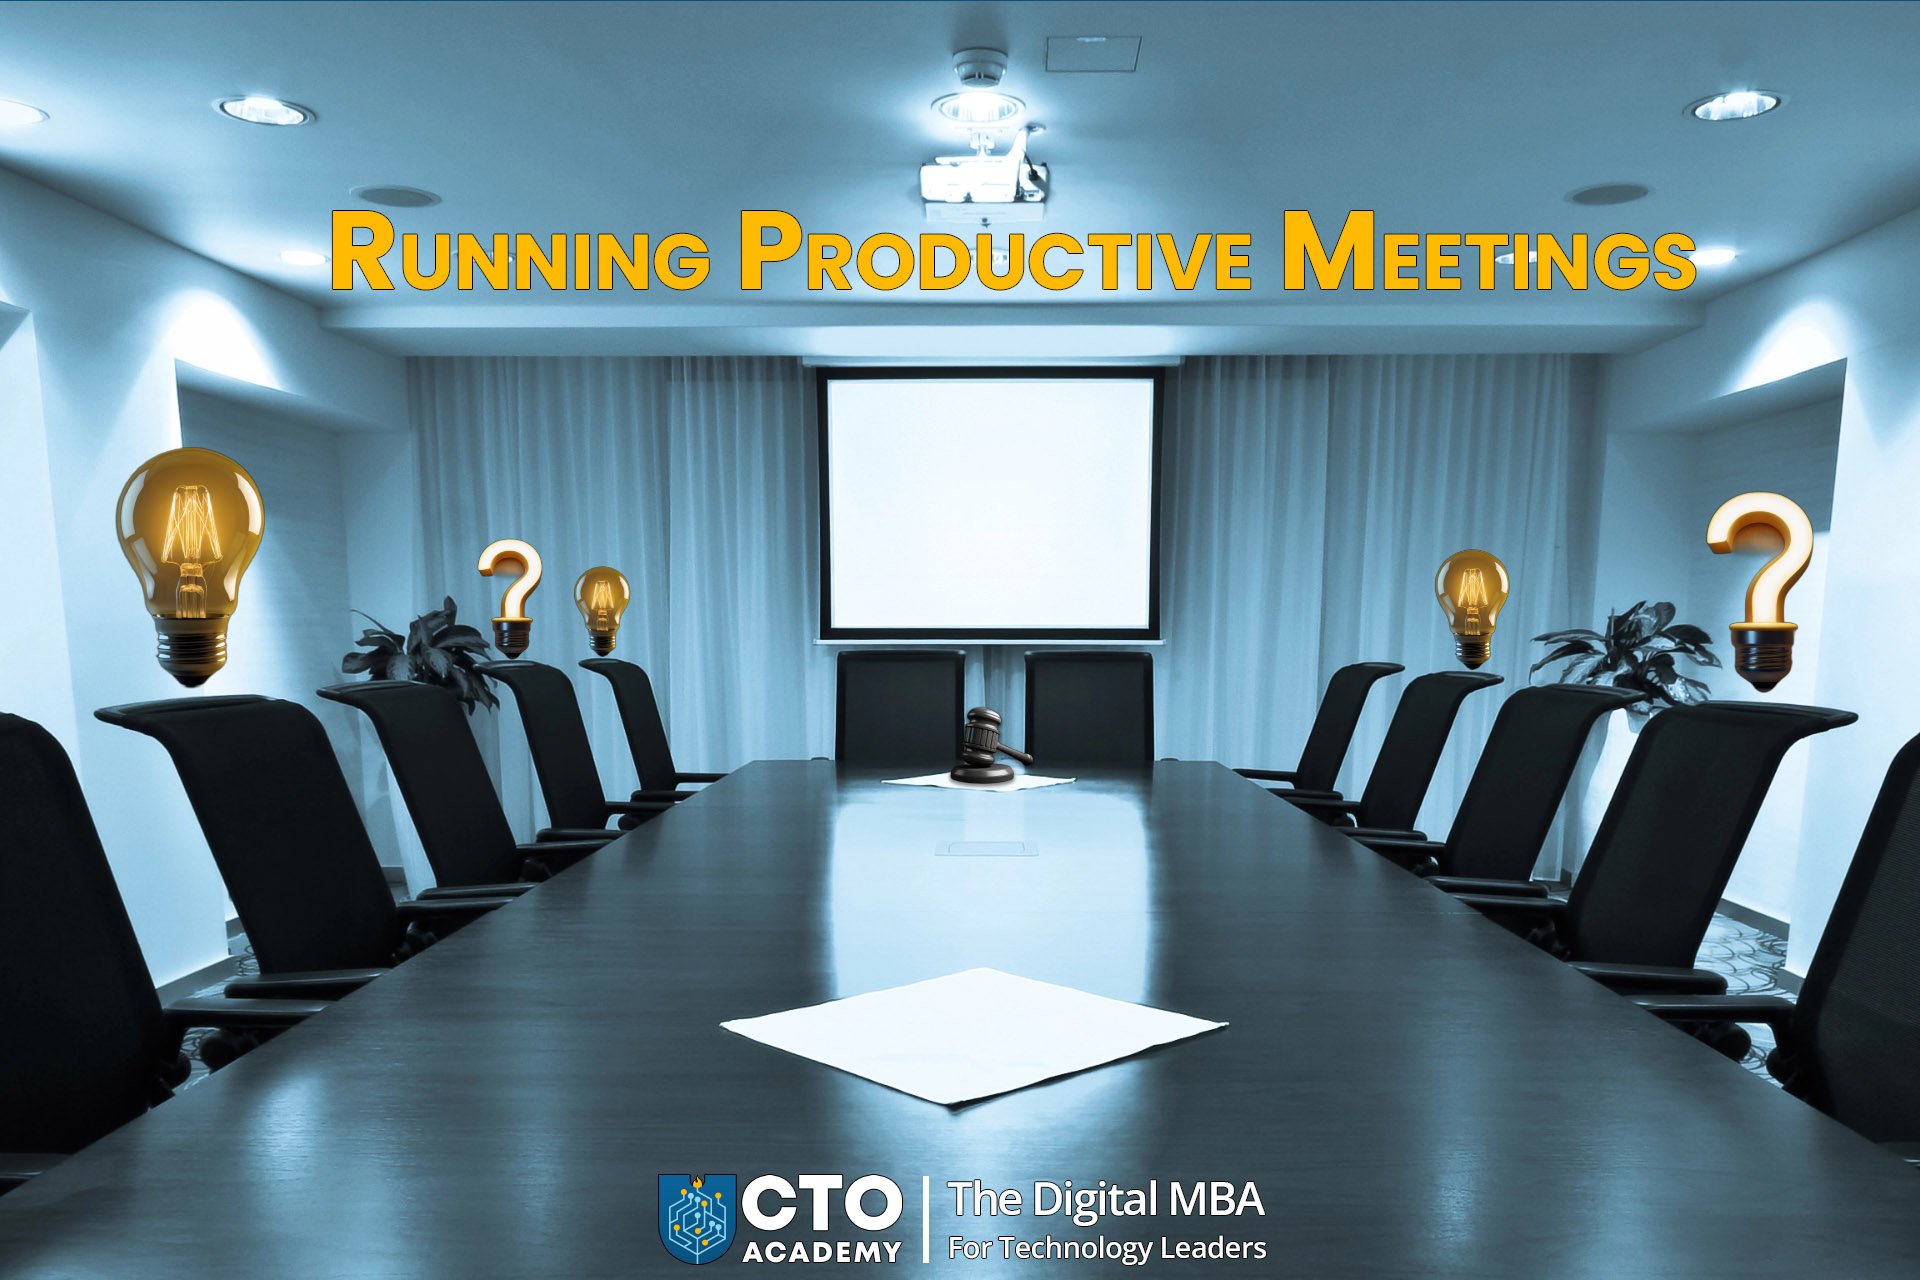 Guide to setting up and running productive meetings - featured image